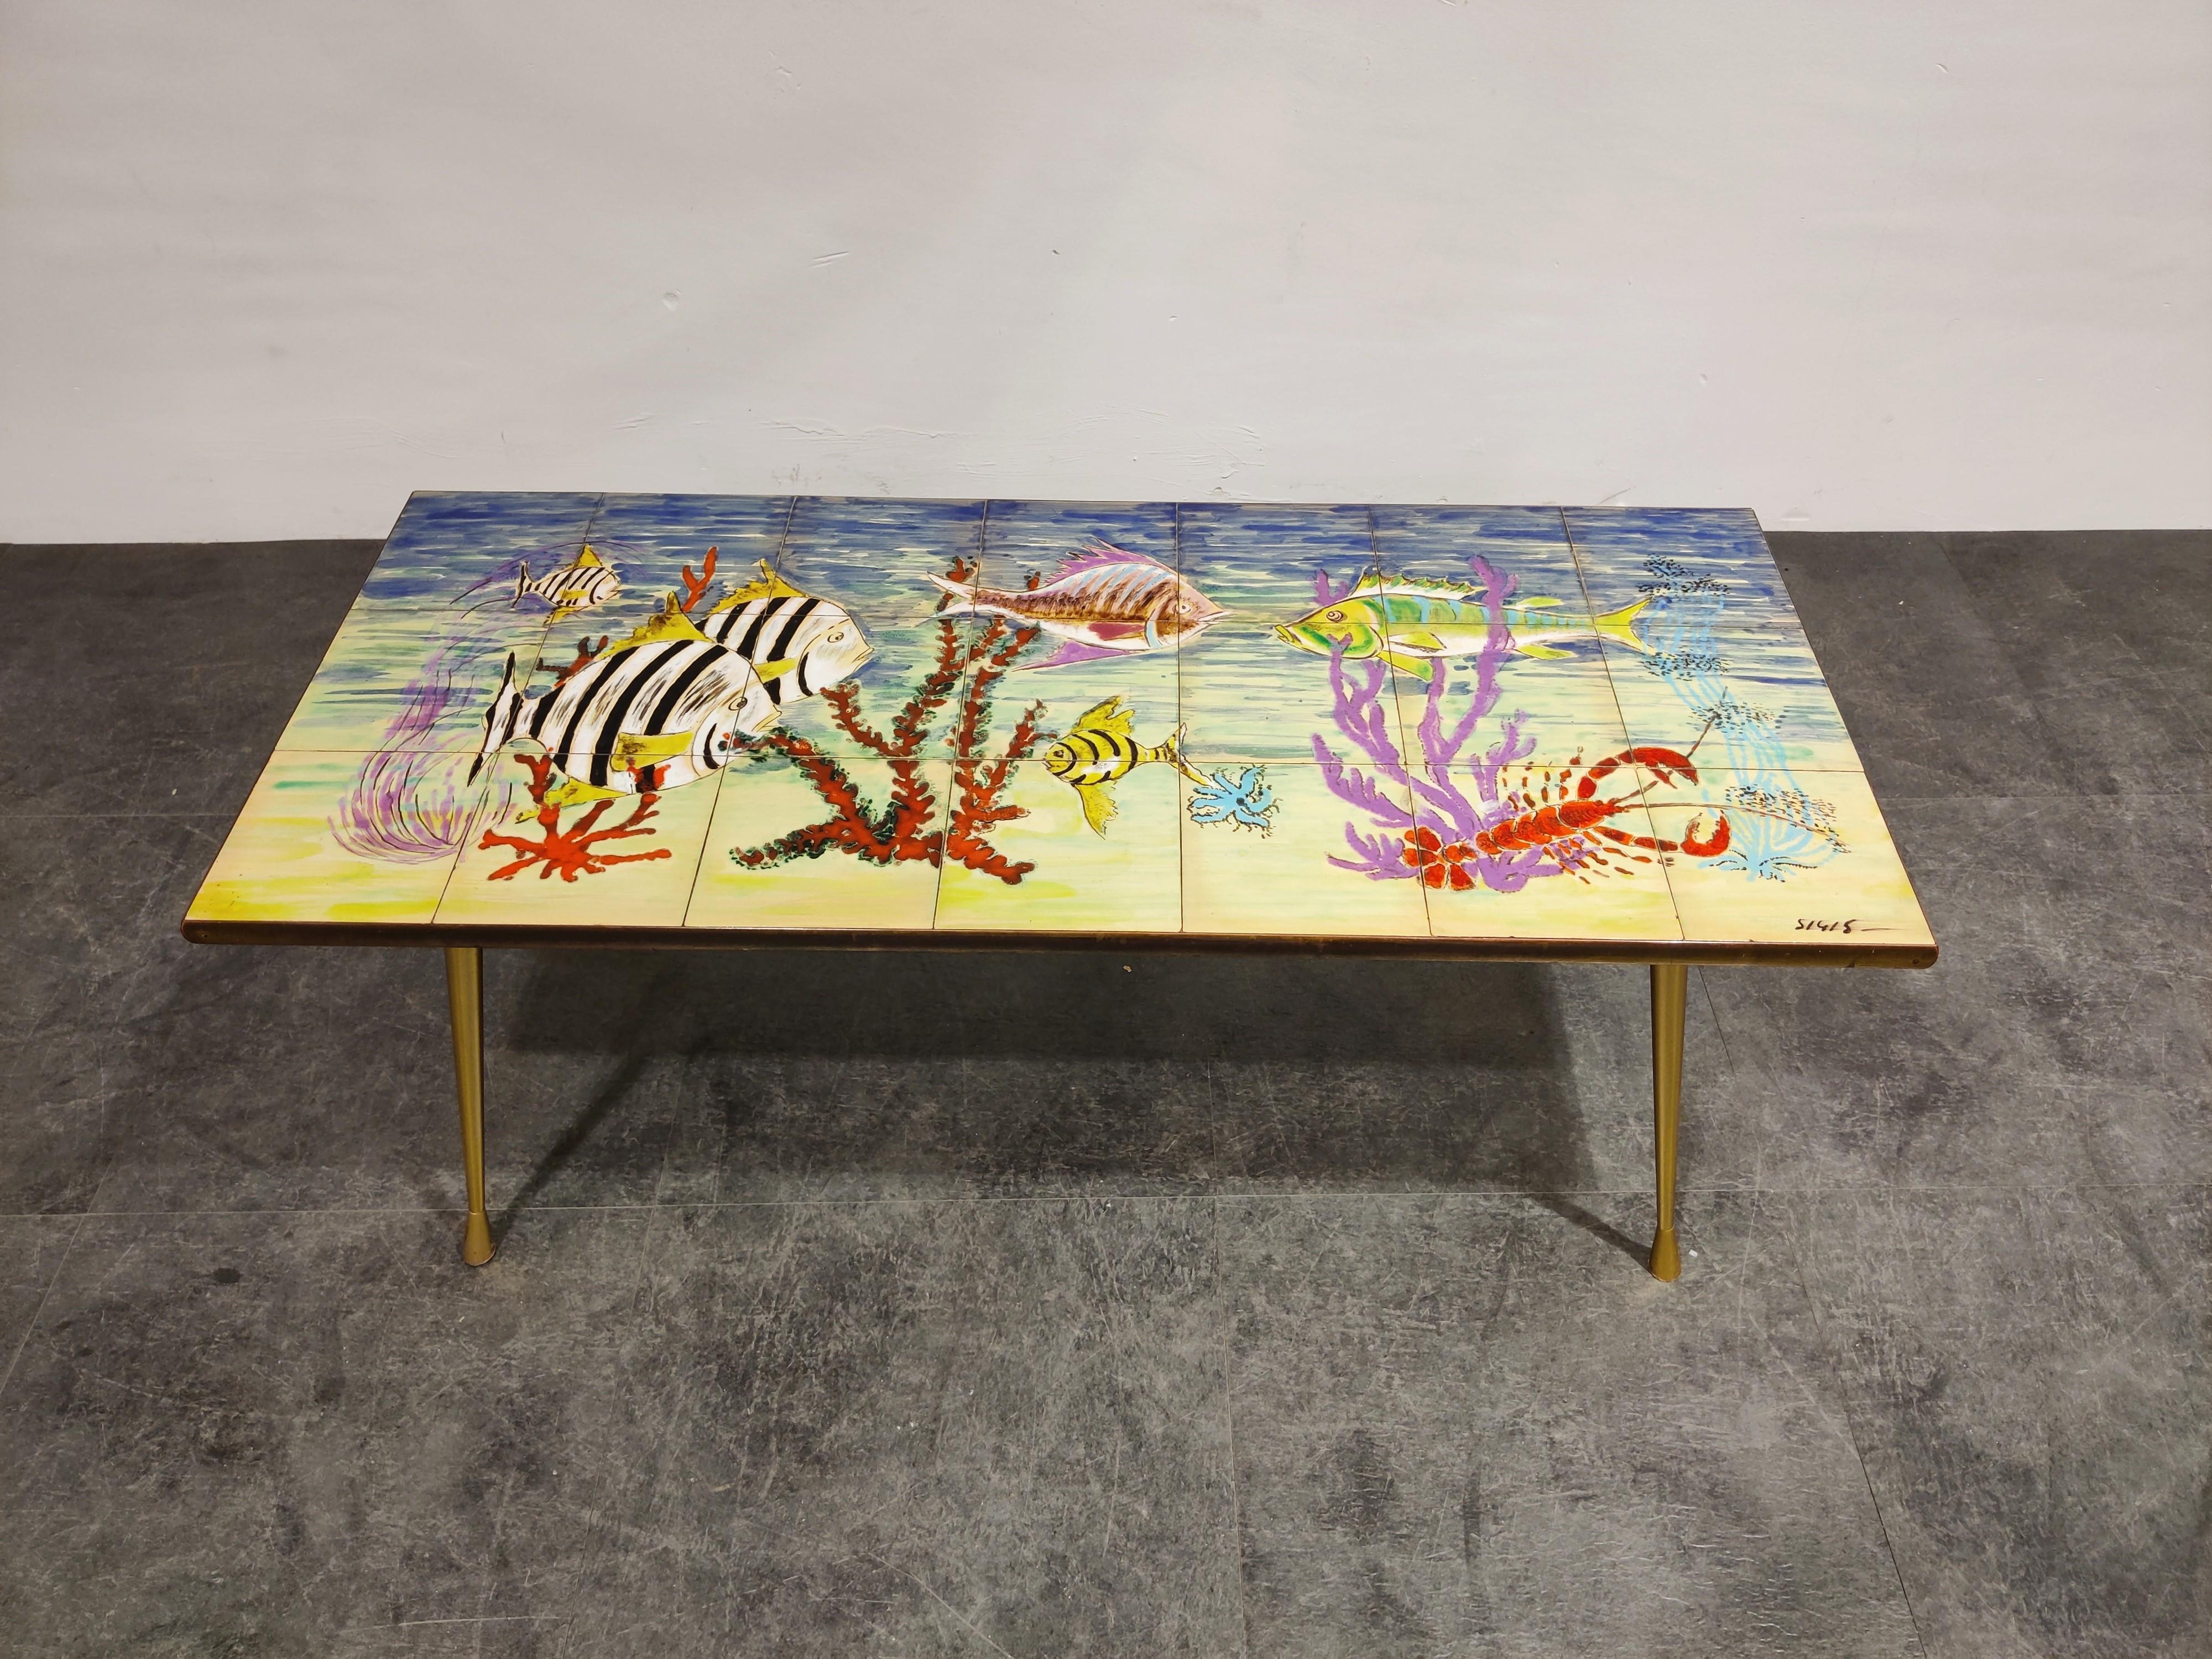 Stricking midcentury coffee table with a ceramic tiled top and elegant cast brass legs.

The table is signed by Sigis.

The coffee table depicts an underwater scene with very lively colors, a piece that really brings happiness.

Good